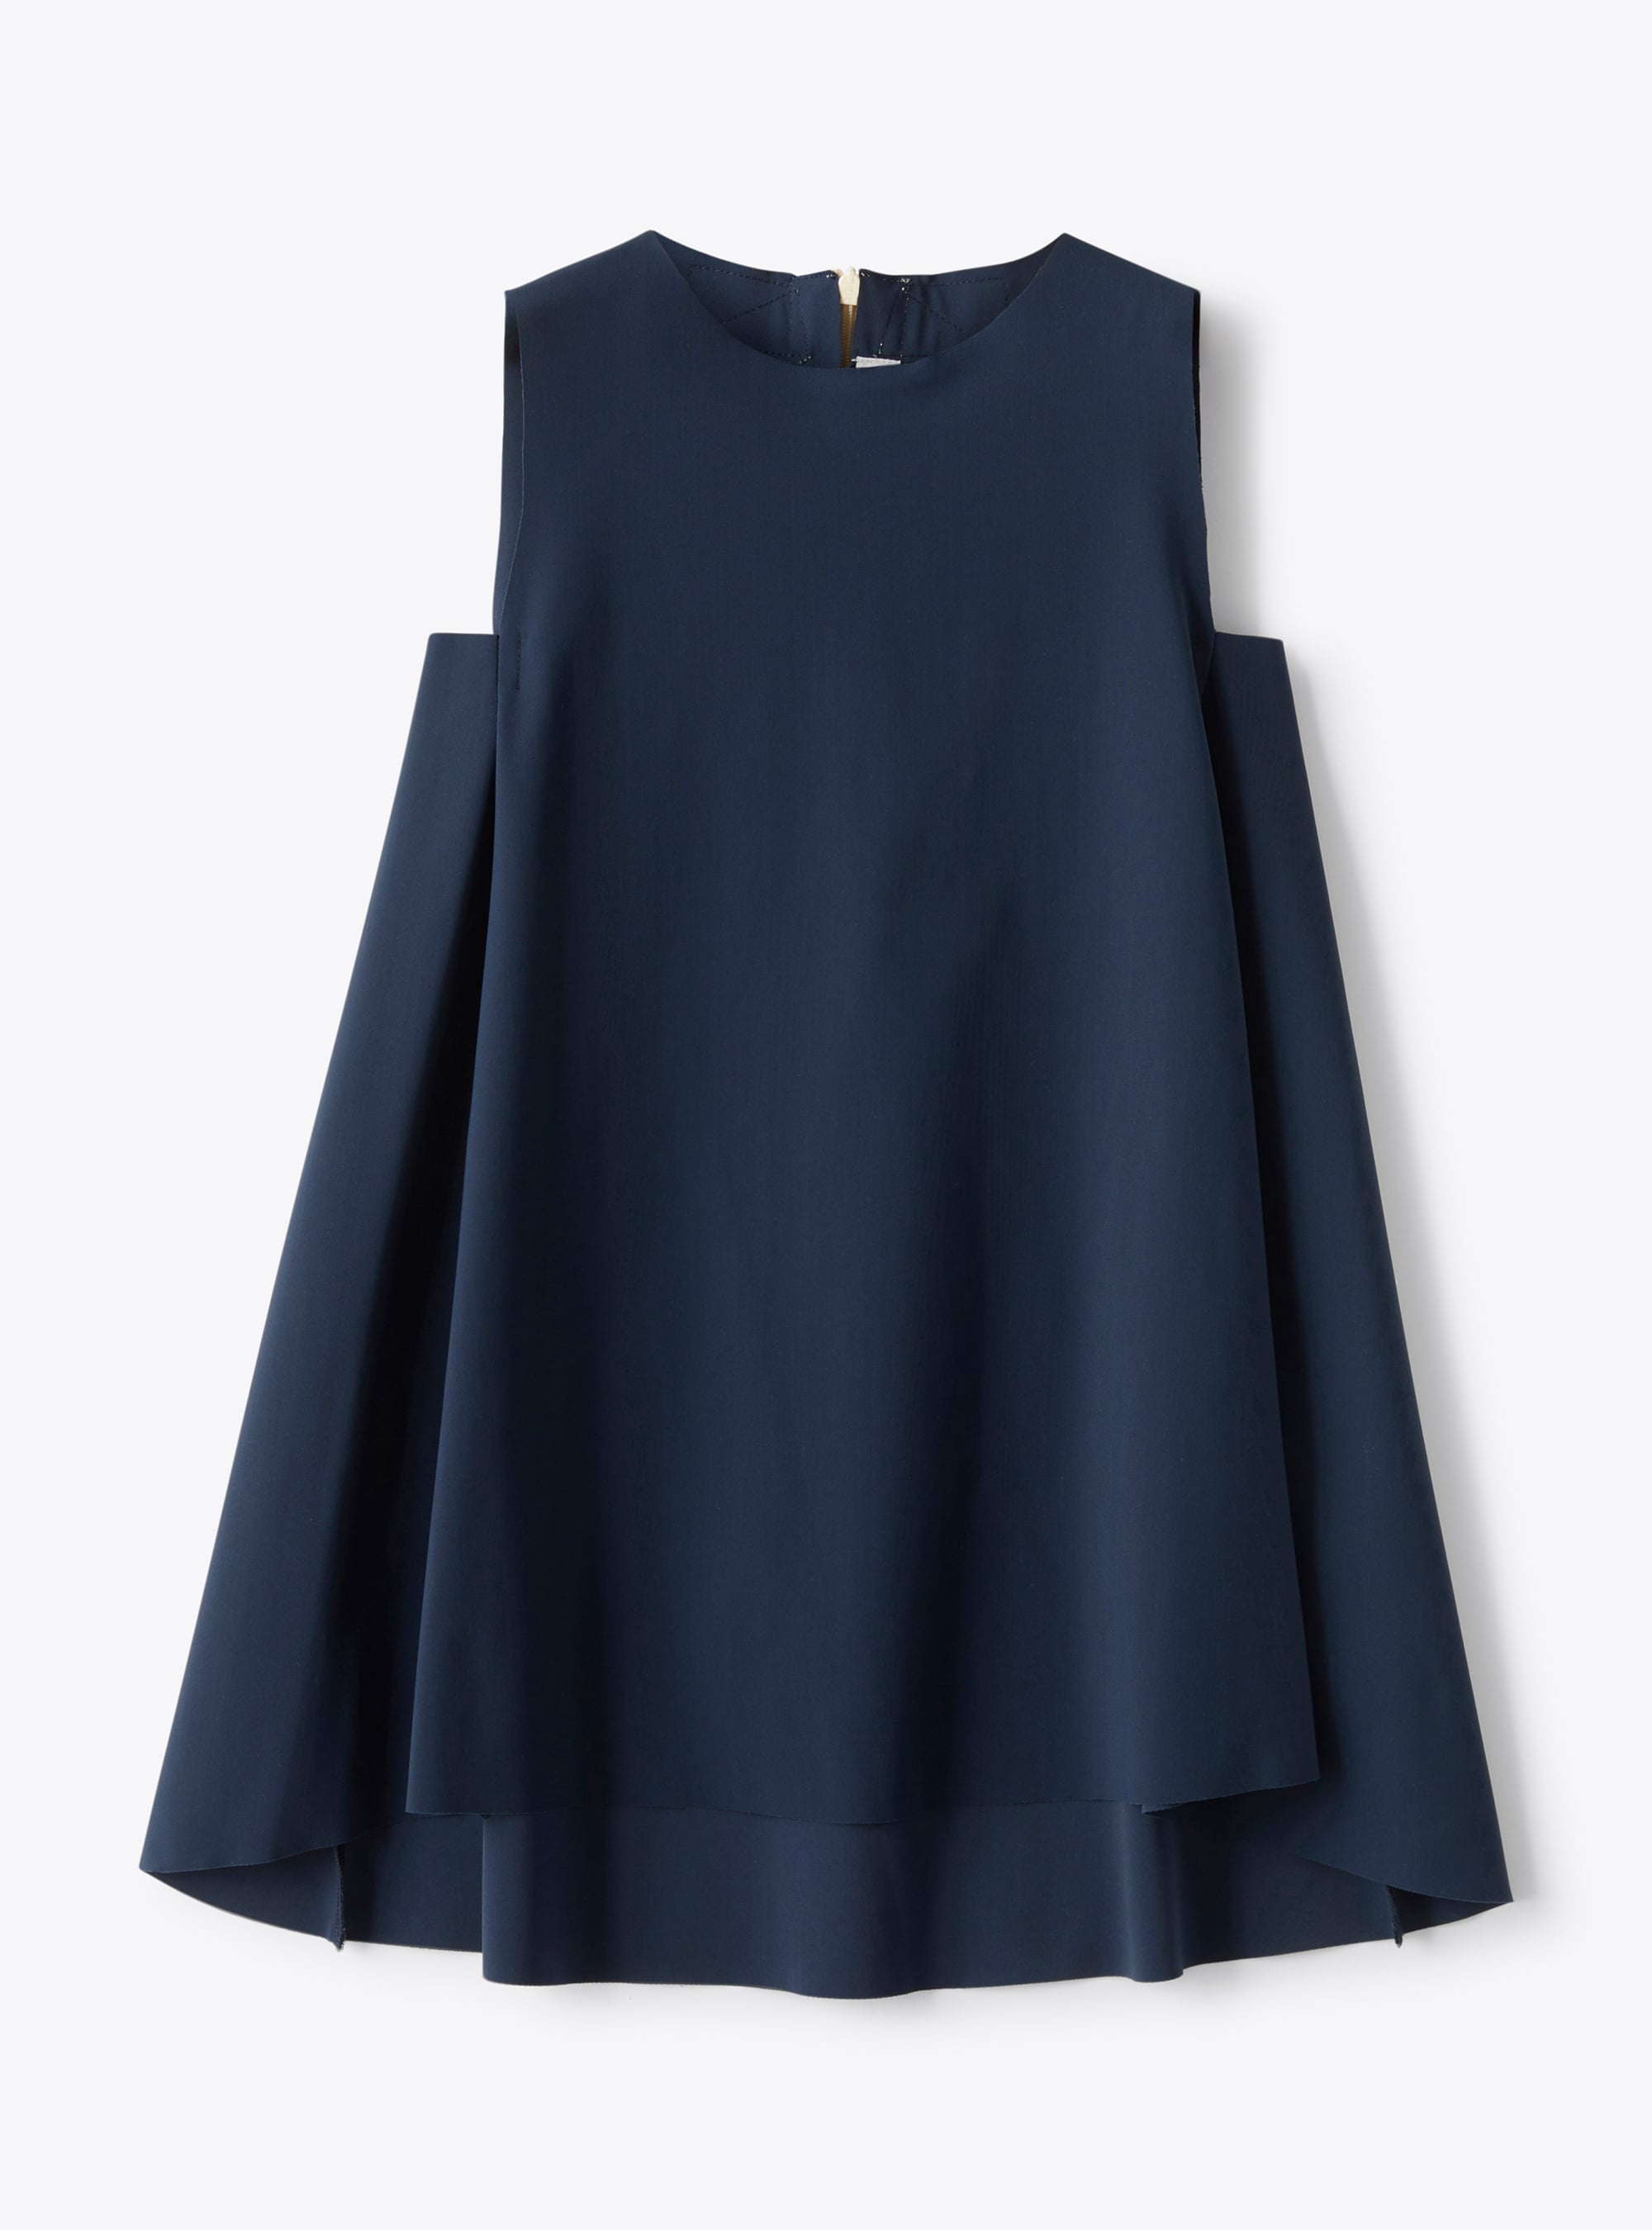 Dress in a blue Sensitive® Fabrics material with a beige bow detail - Dresses - Il Gufo